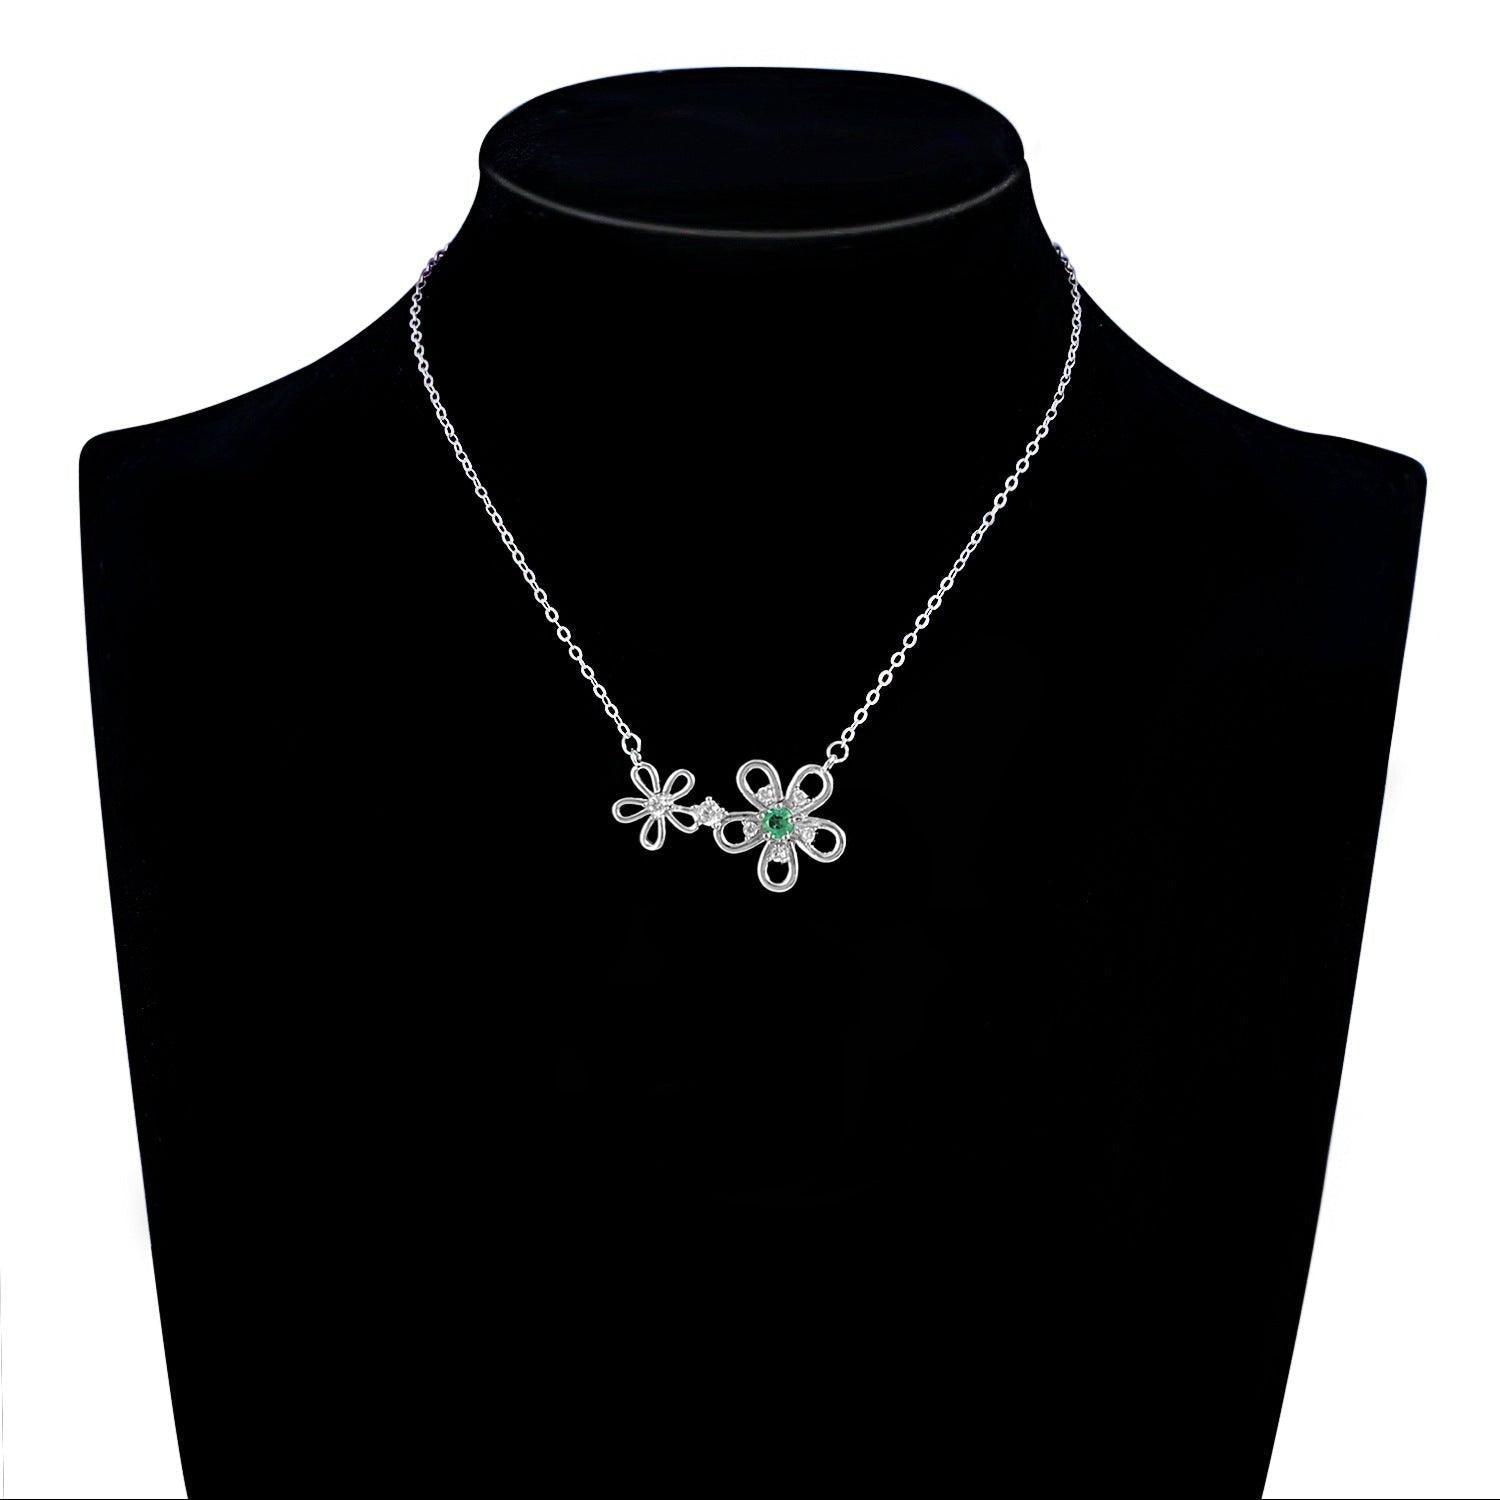 S925 Silver Girl's Versatile Collar Chain Emerald Necklace in 2023 | S925 Silver Girl's Versatile Collar Chain Emerald Necklace - undefined | Emerald Necklace, S925 silver fashion emerald necklace, S925 Silver necklace | From Hunny Life | hunnylife.com